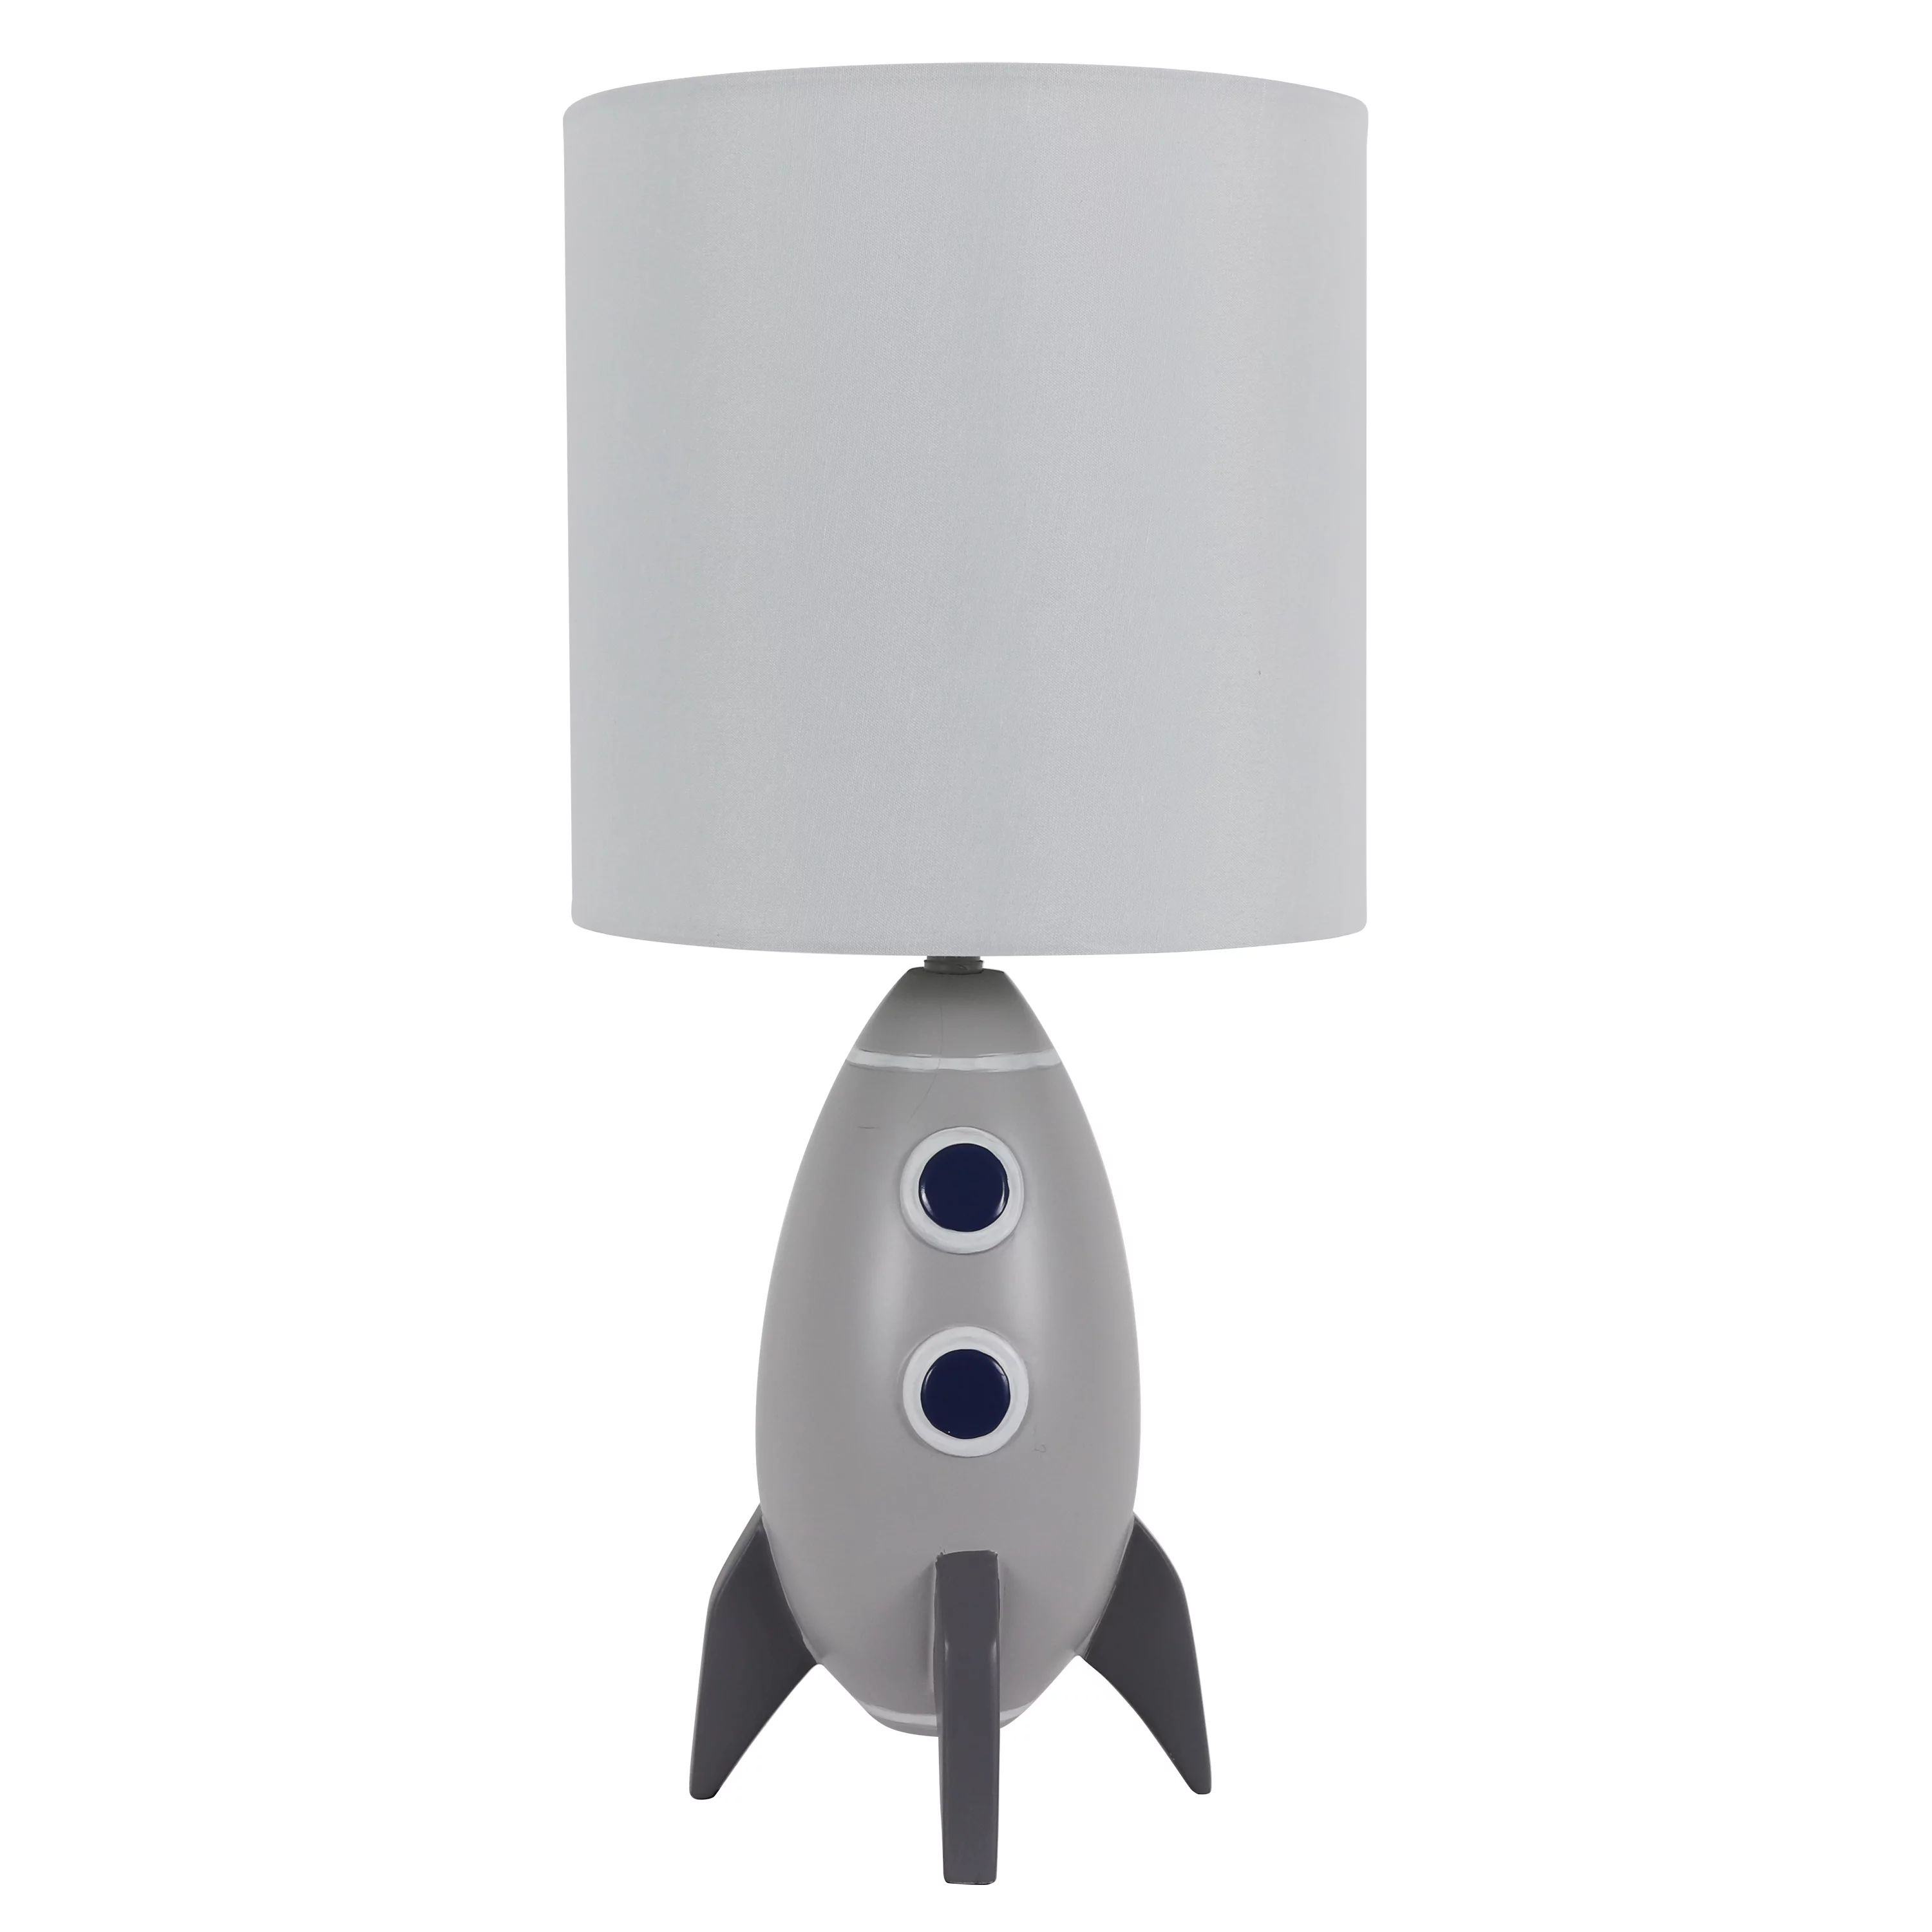 Kids Poly Rocket Table Lamp, Gray Finish, Your Zone | Walmart (US)